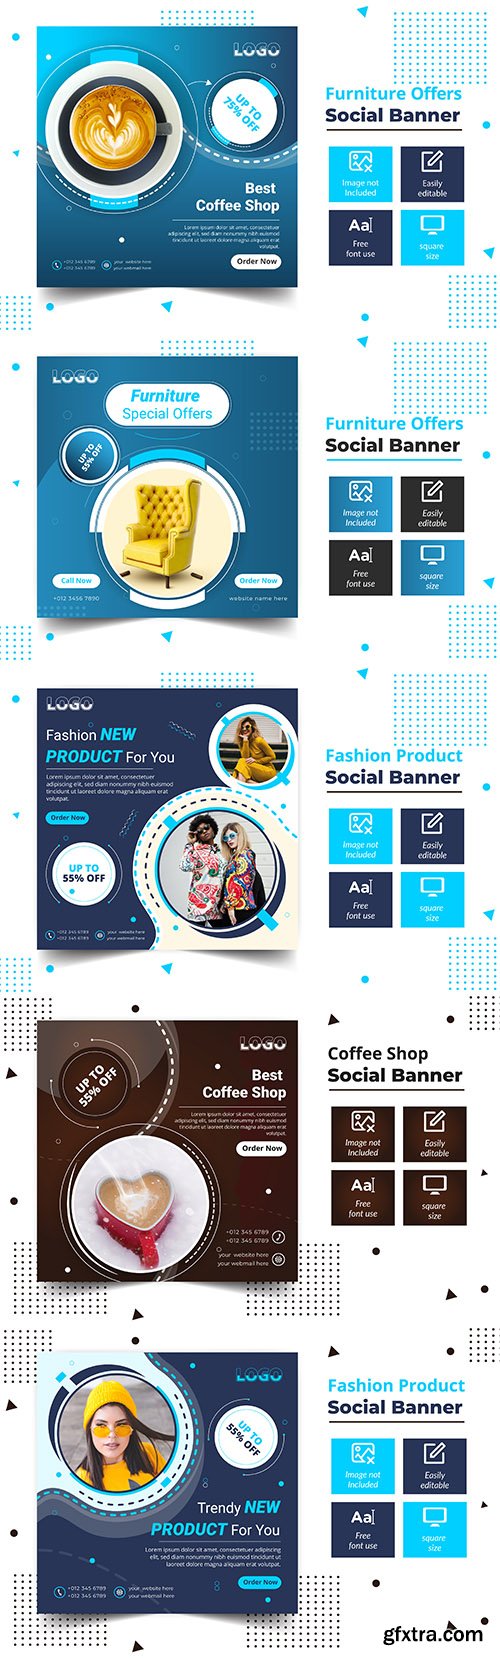 Fashion product offers post square banner templatexA;